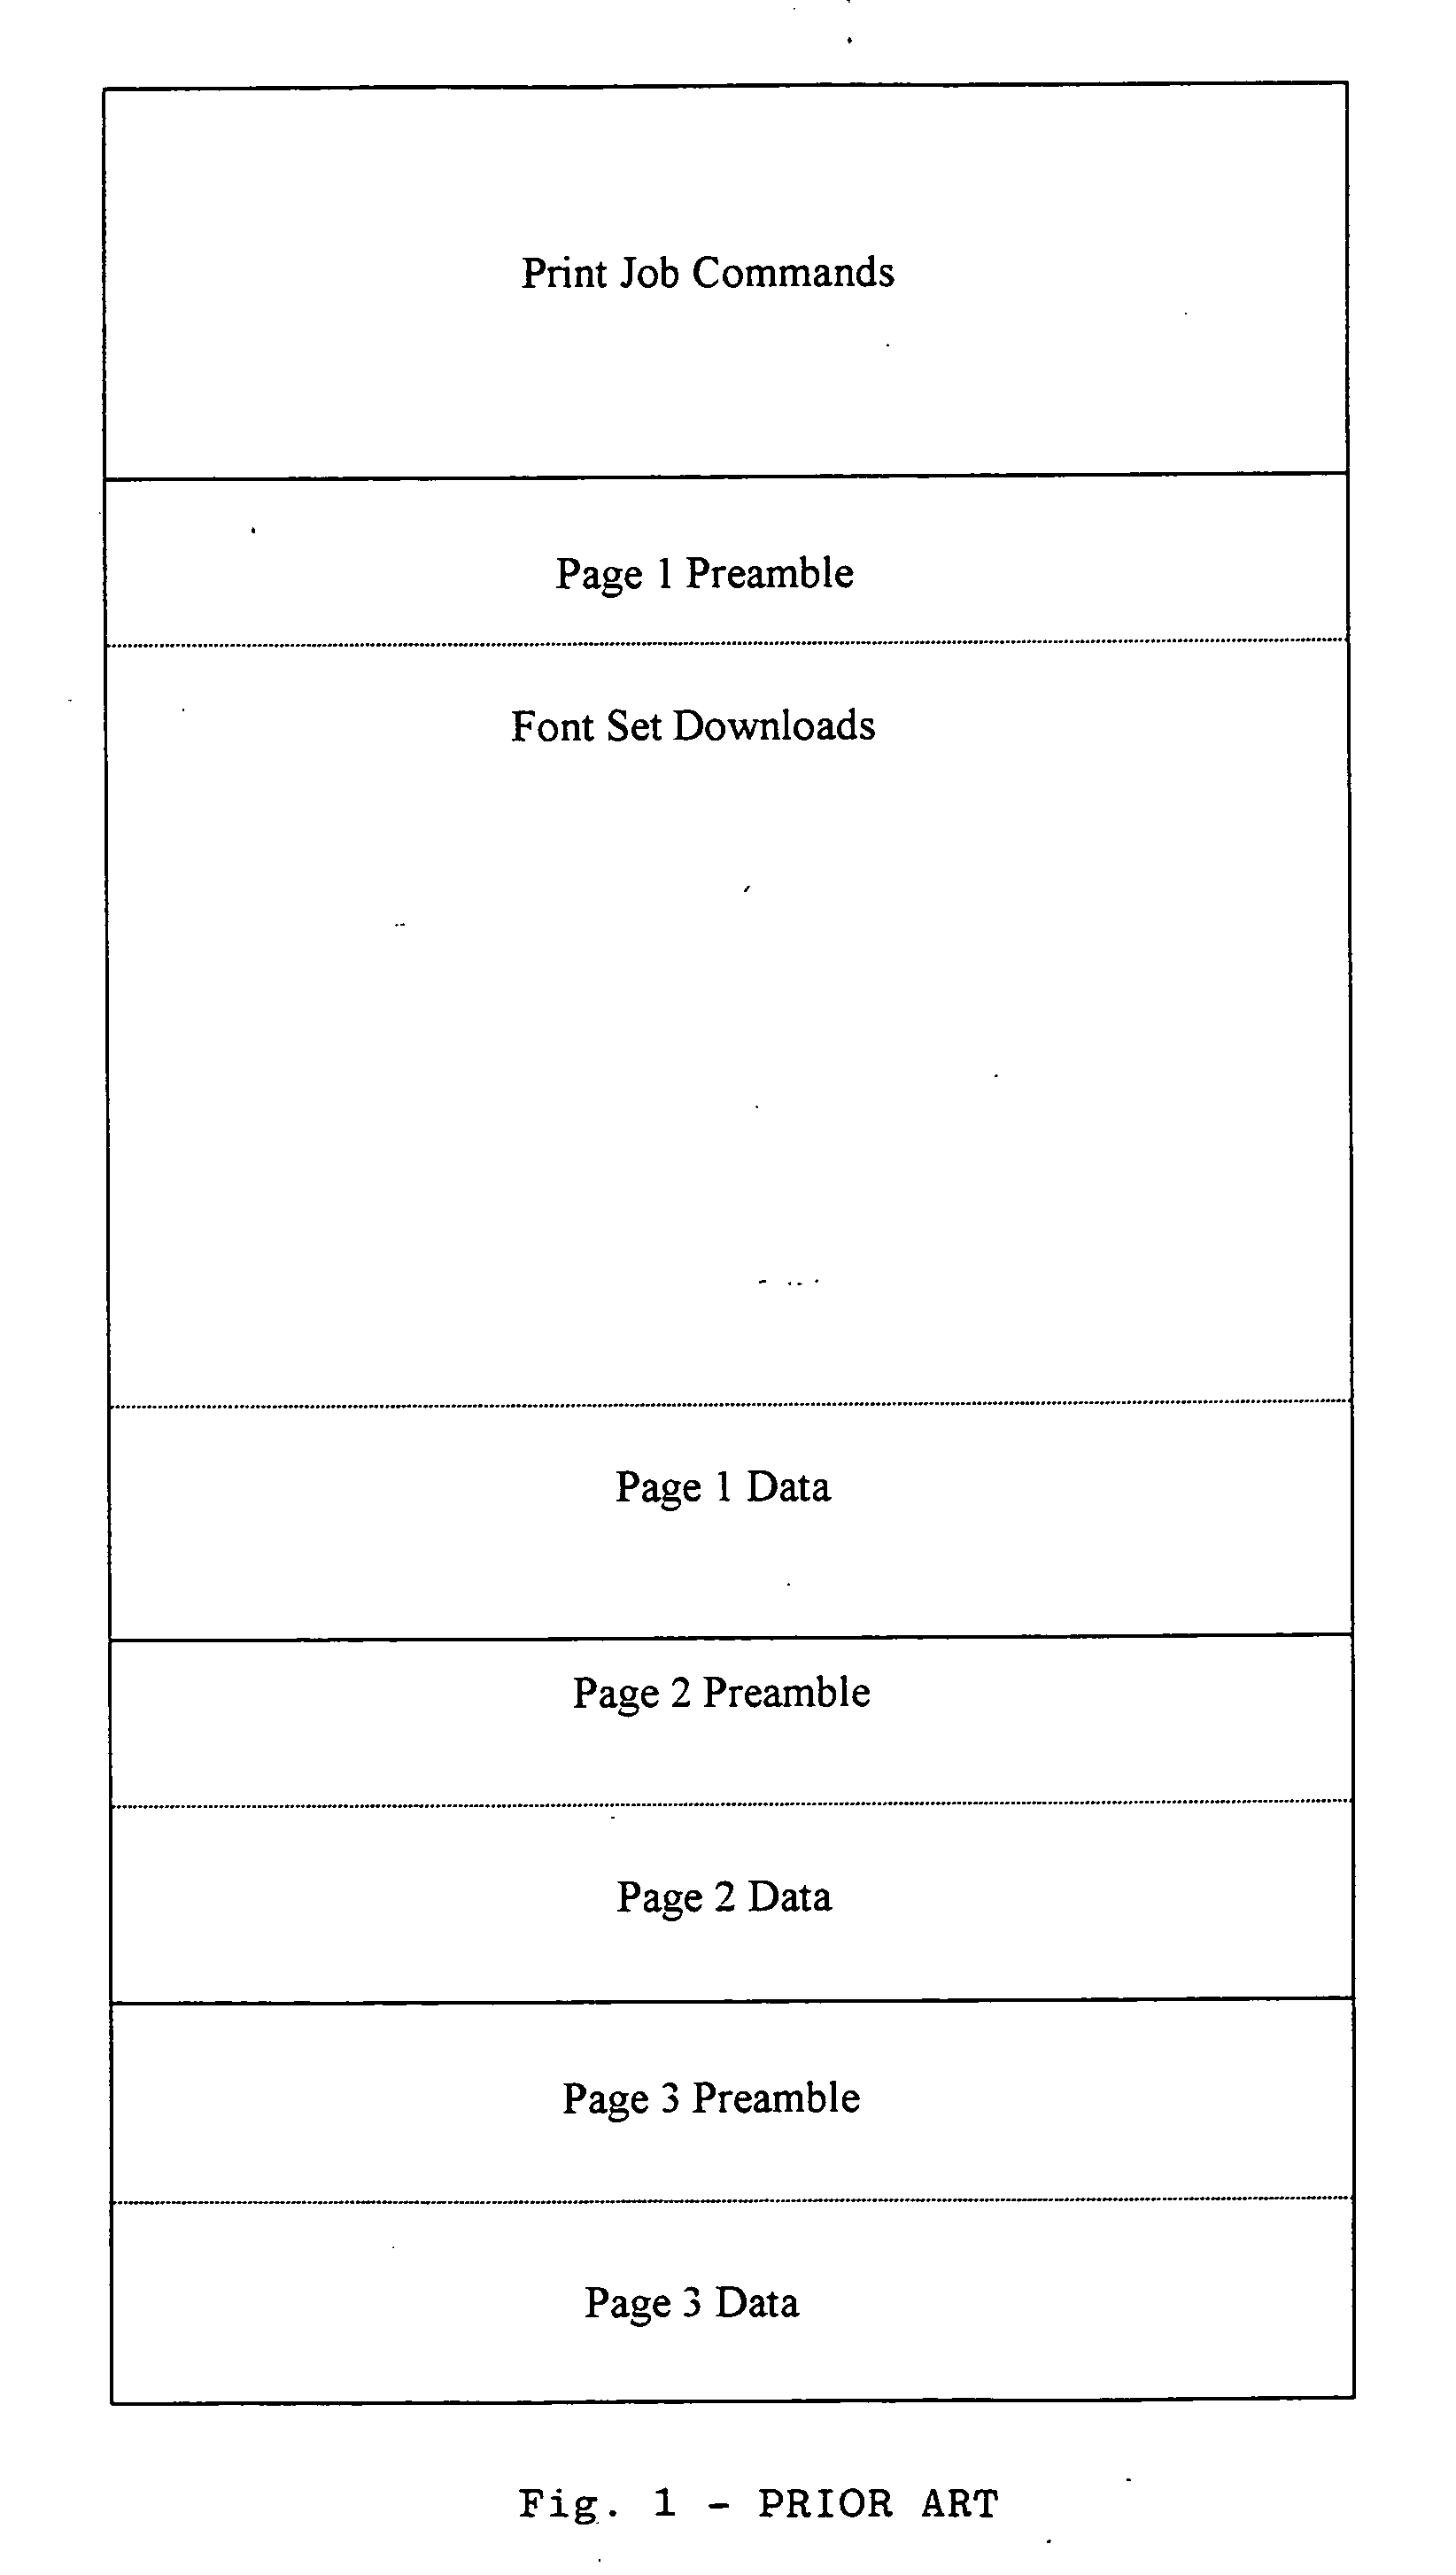 Load balanced document splitting by weighting pages